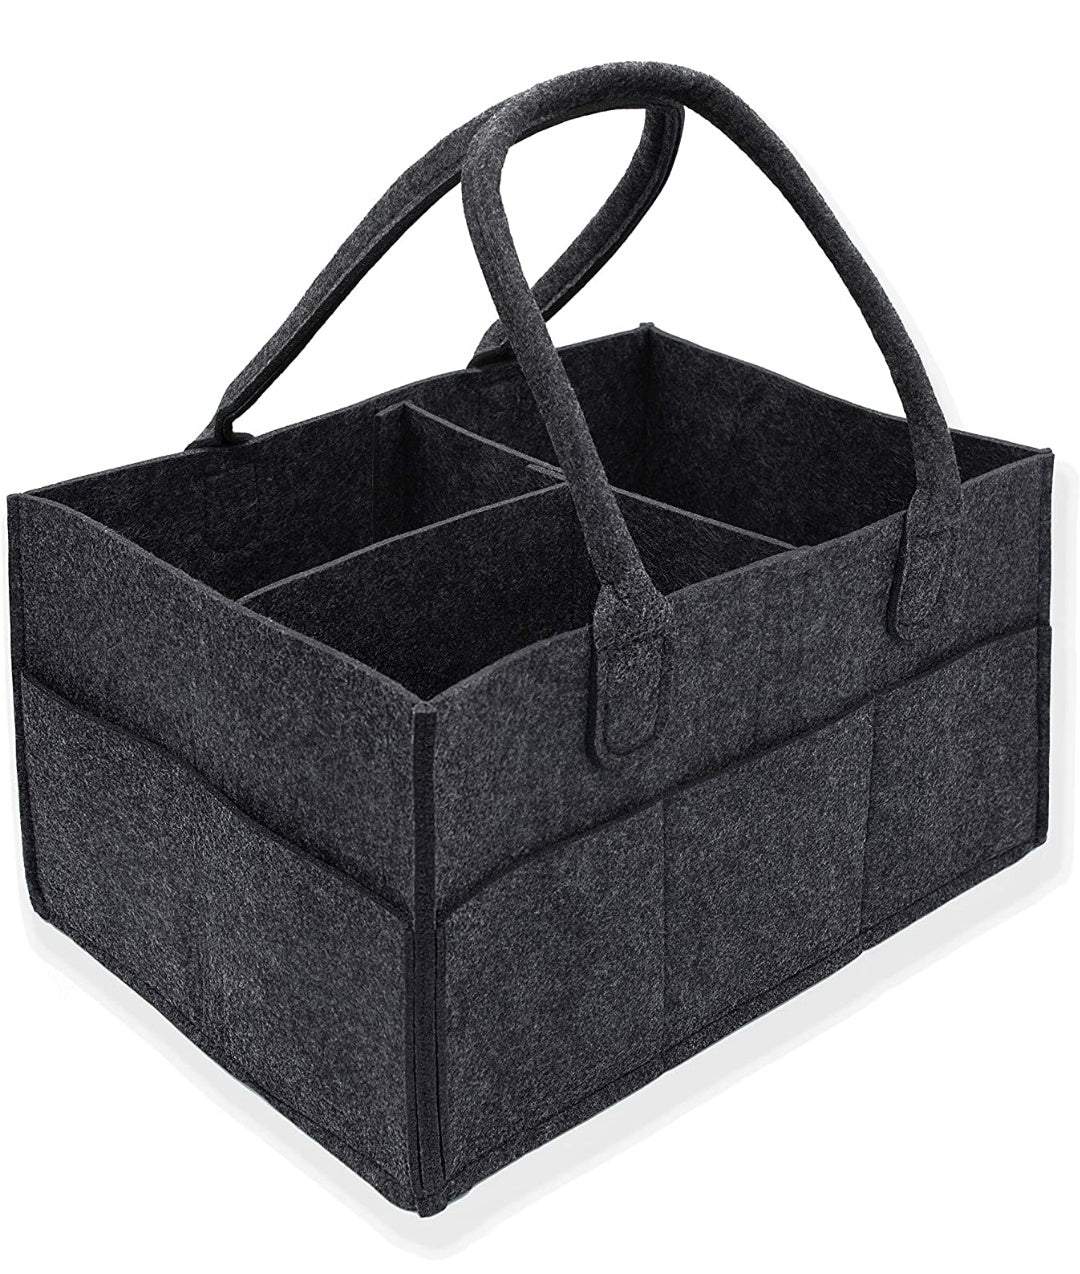 loomsmith-caddy-basket-for-nursery-car-uses-with-strong-holding-loops-black-color-high-quality-felt